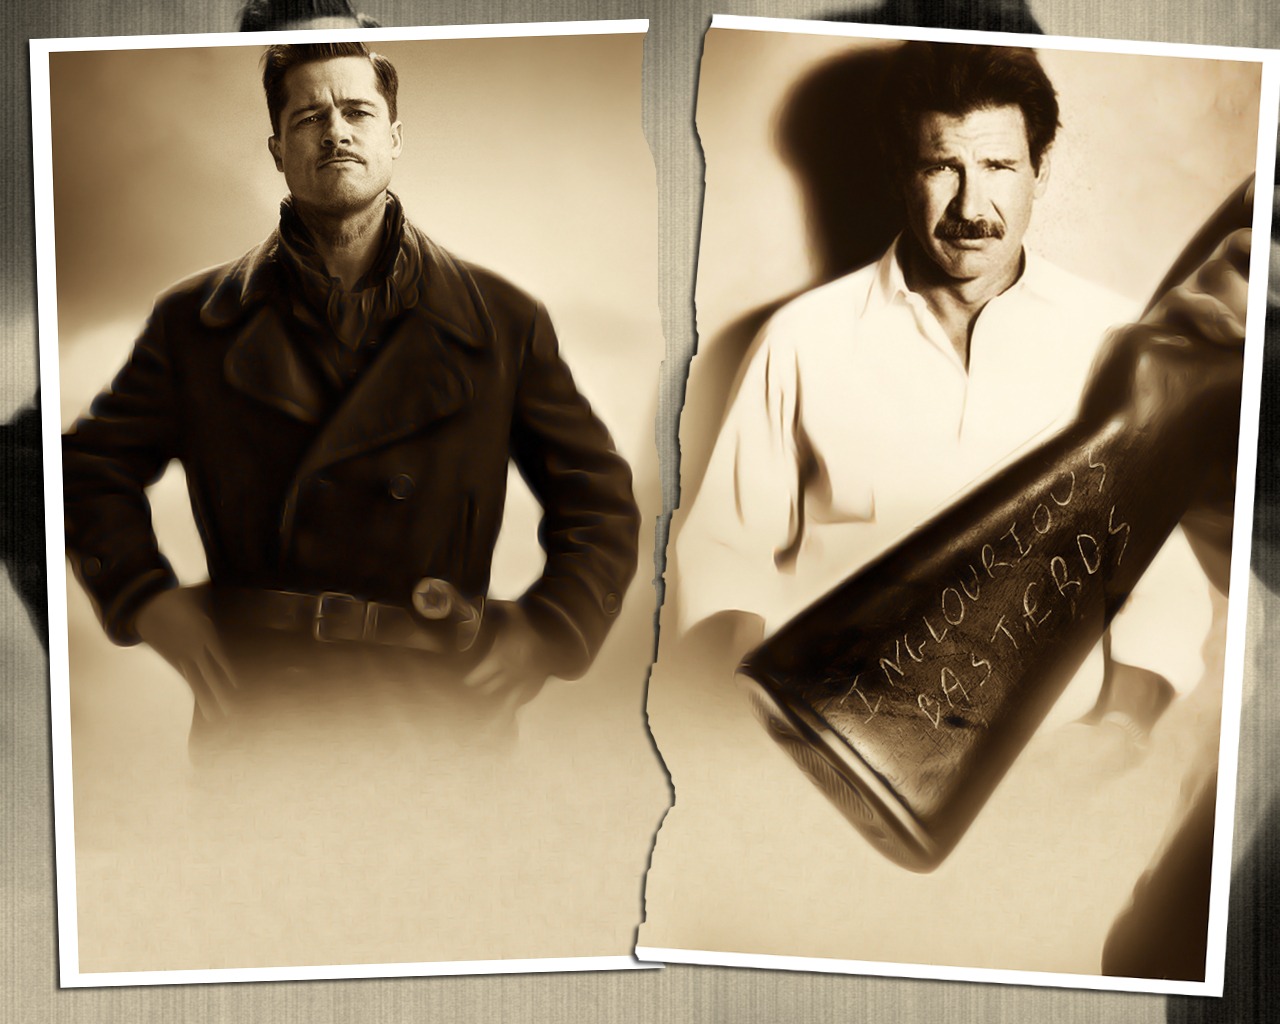 Inglourious Basterds and Harry by Heriorh on DeviantArt